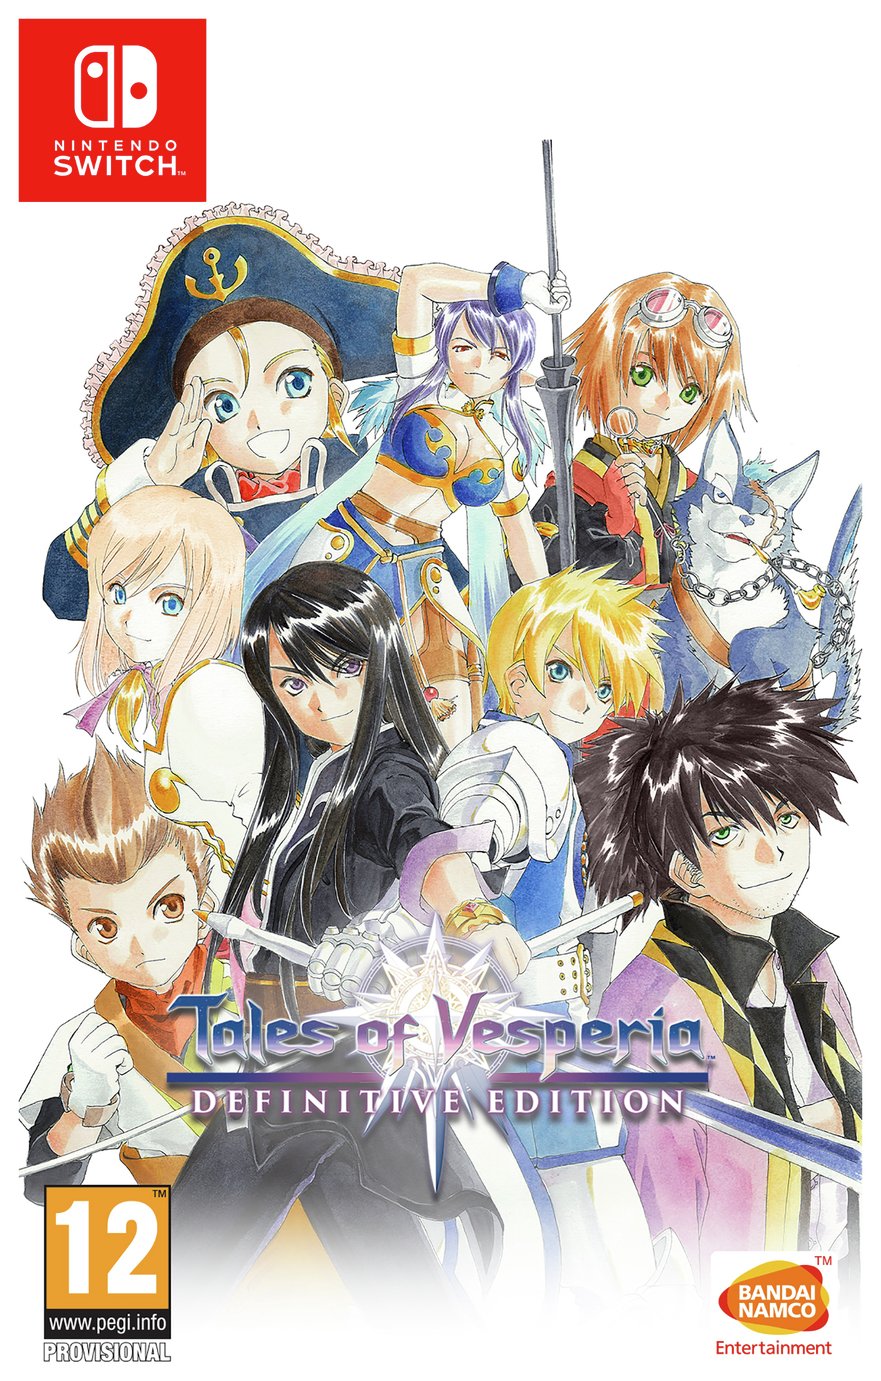 Tales of Vesperia Definitive Edition Nintendo Switch Game